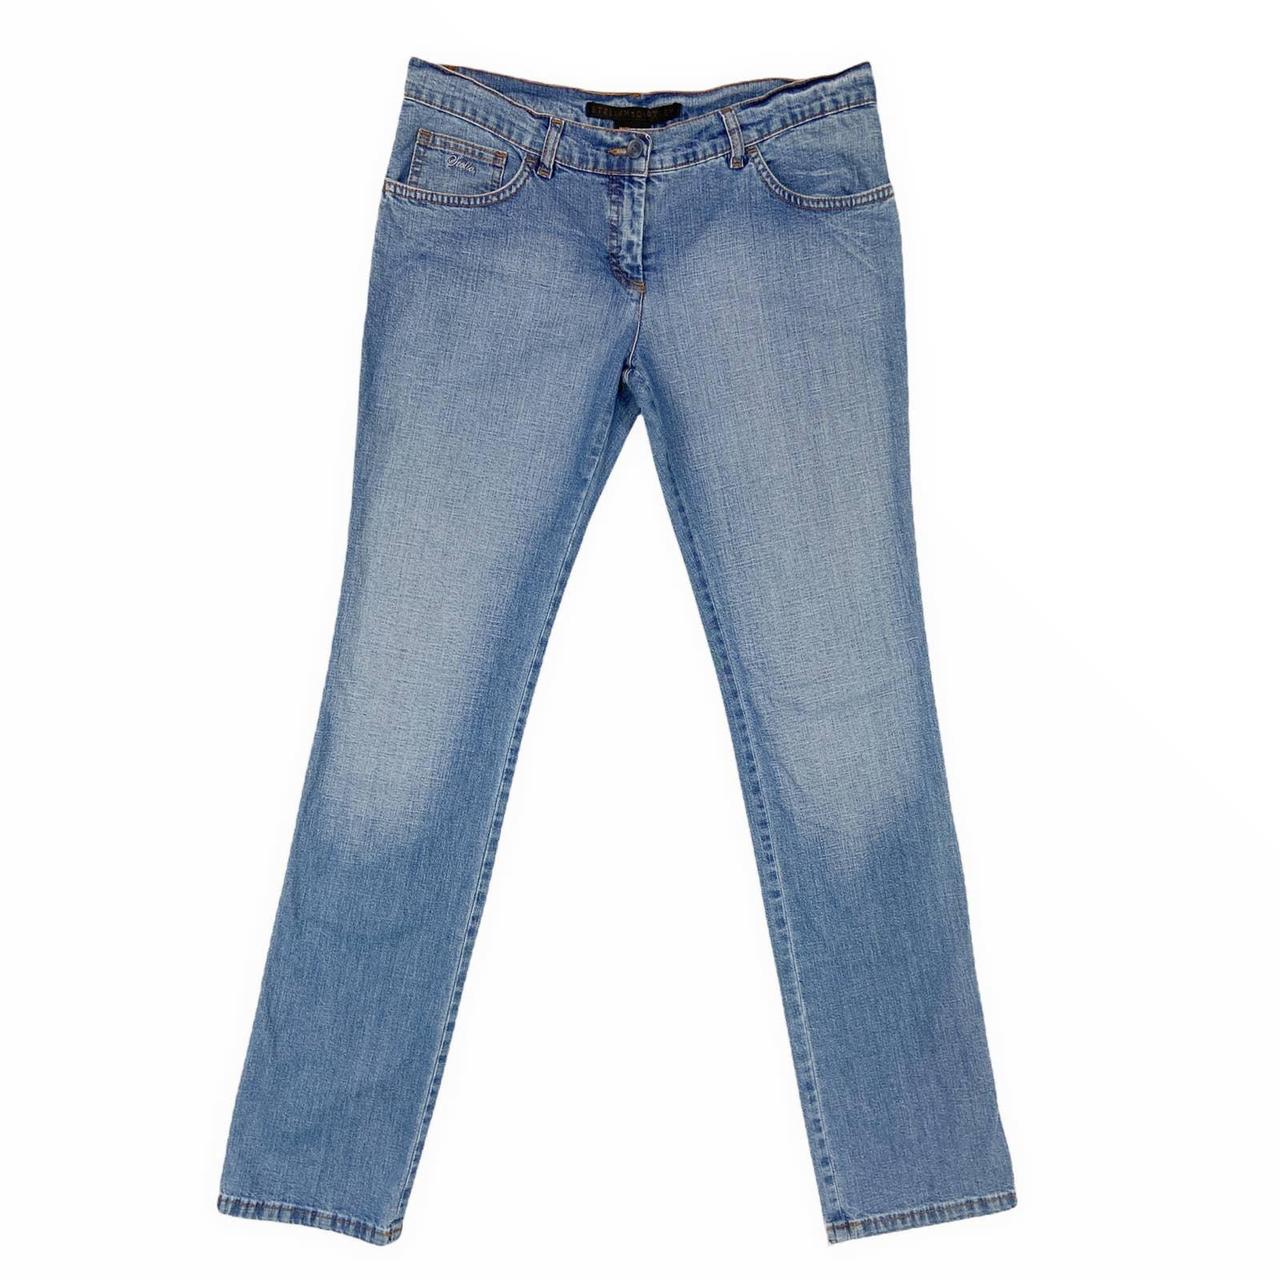 Product Image 1 - Low rise skinny jeans by